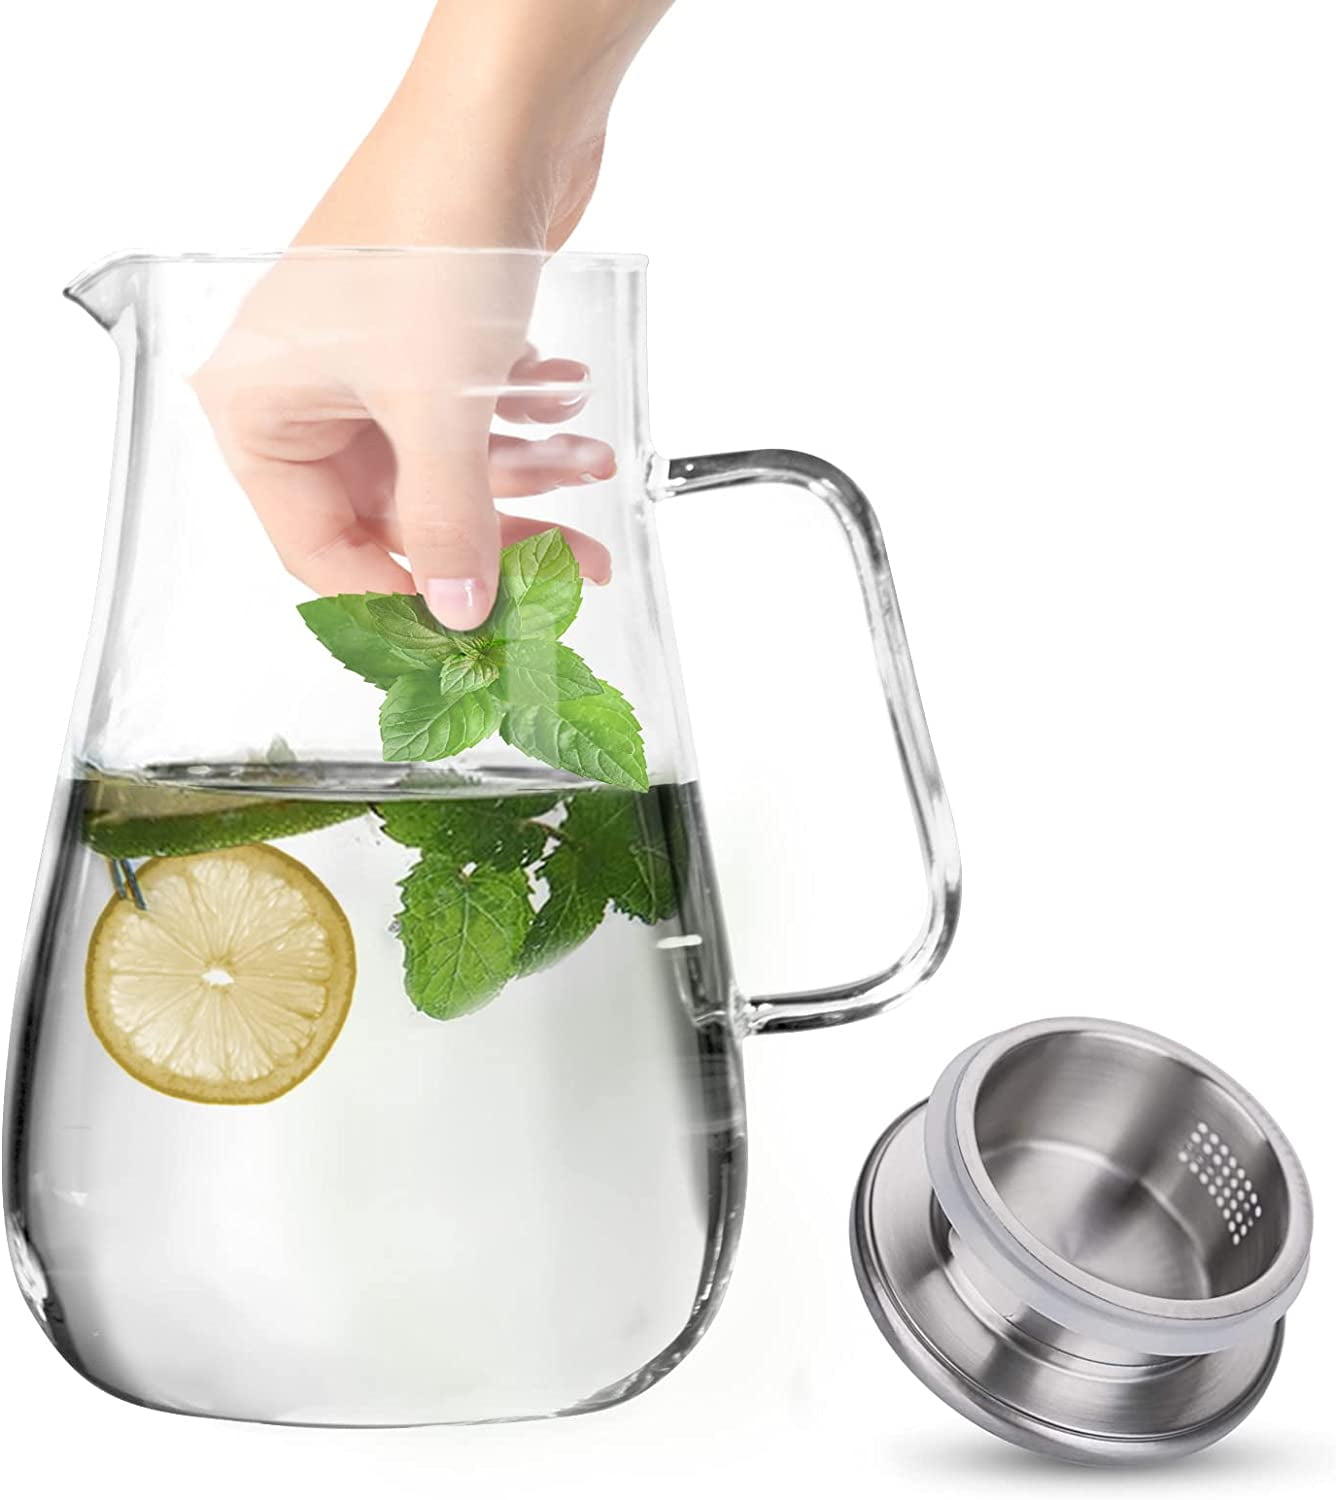 Bunhut Glass Pitcher with Lid,68 Ounces Water Pitcher for Hot Cold Drinks,Glass Water Jar with Heat-Resistant Handle,Large Beverage Pitcher,High